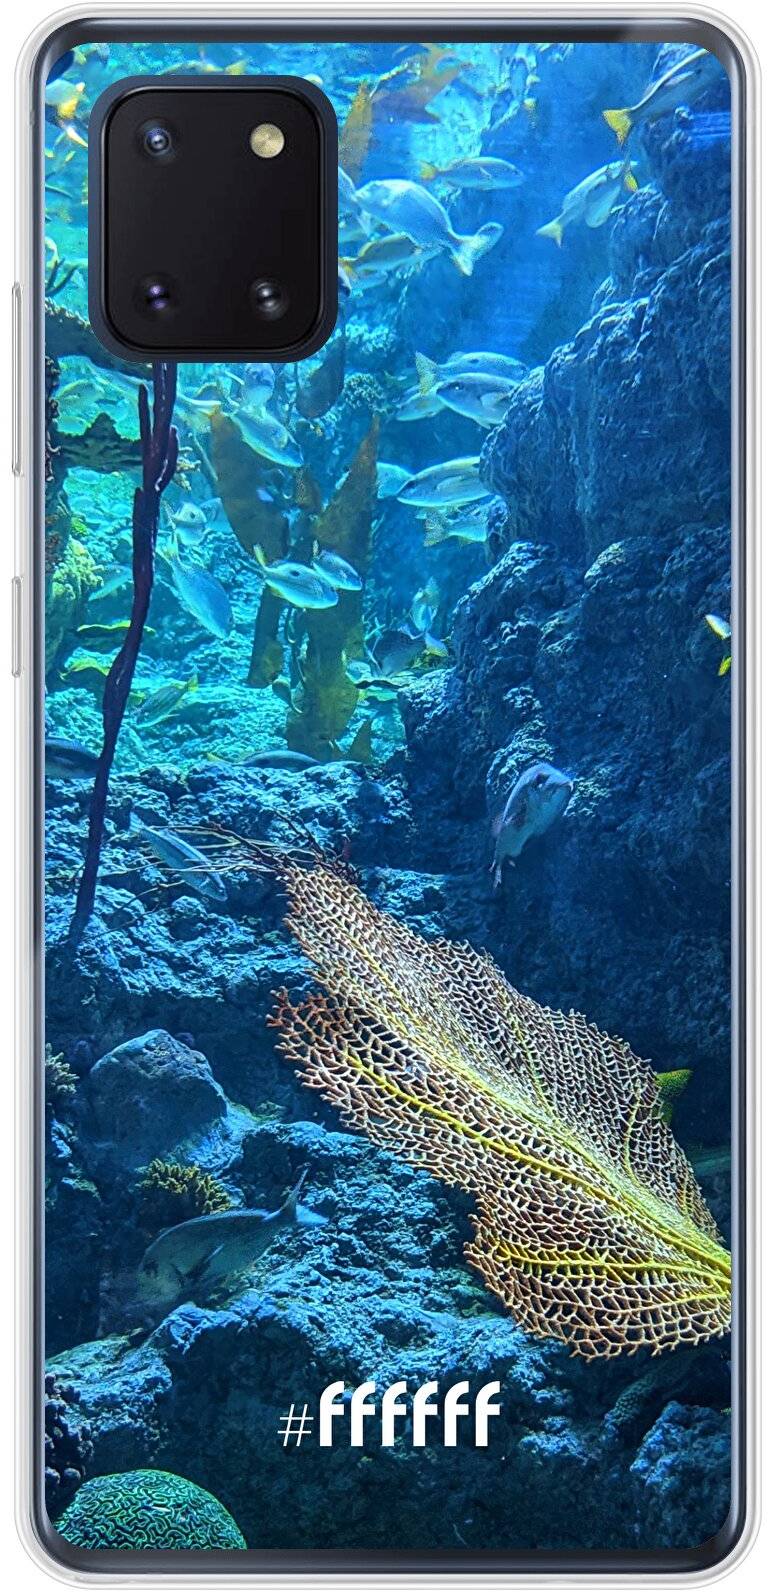 Coral Reef Galaxy Note 10 Lite